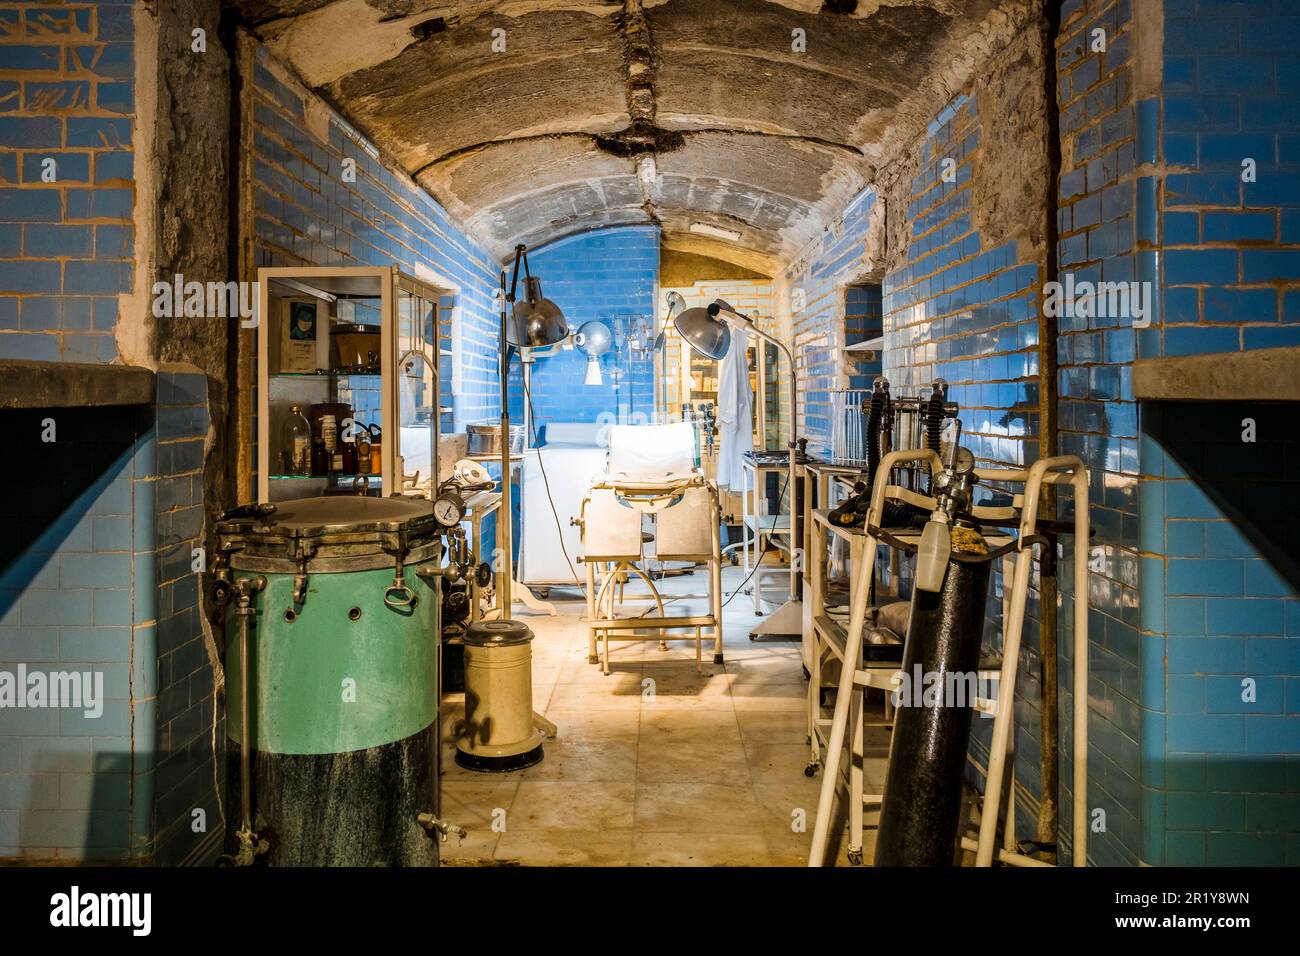 Historical underground hospital was constructed  to protect patients and staff from attack during the Spanish civil war in Almeria, Spain Stock Photo